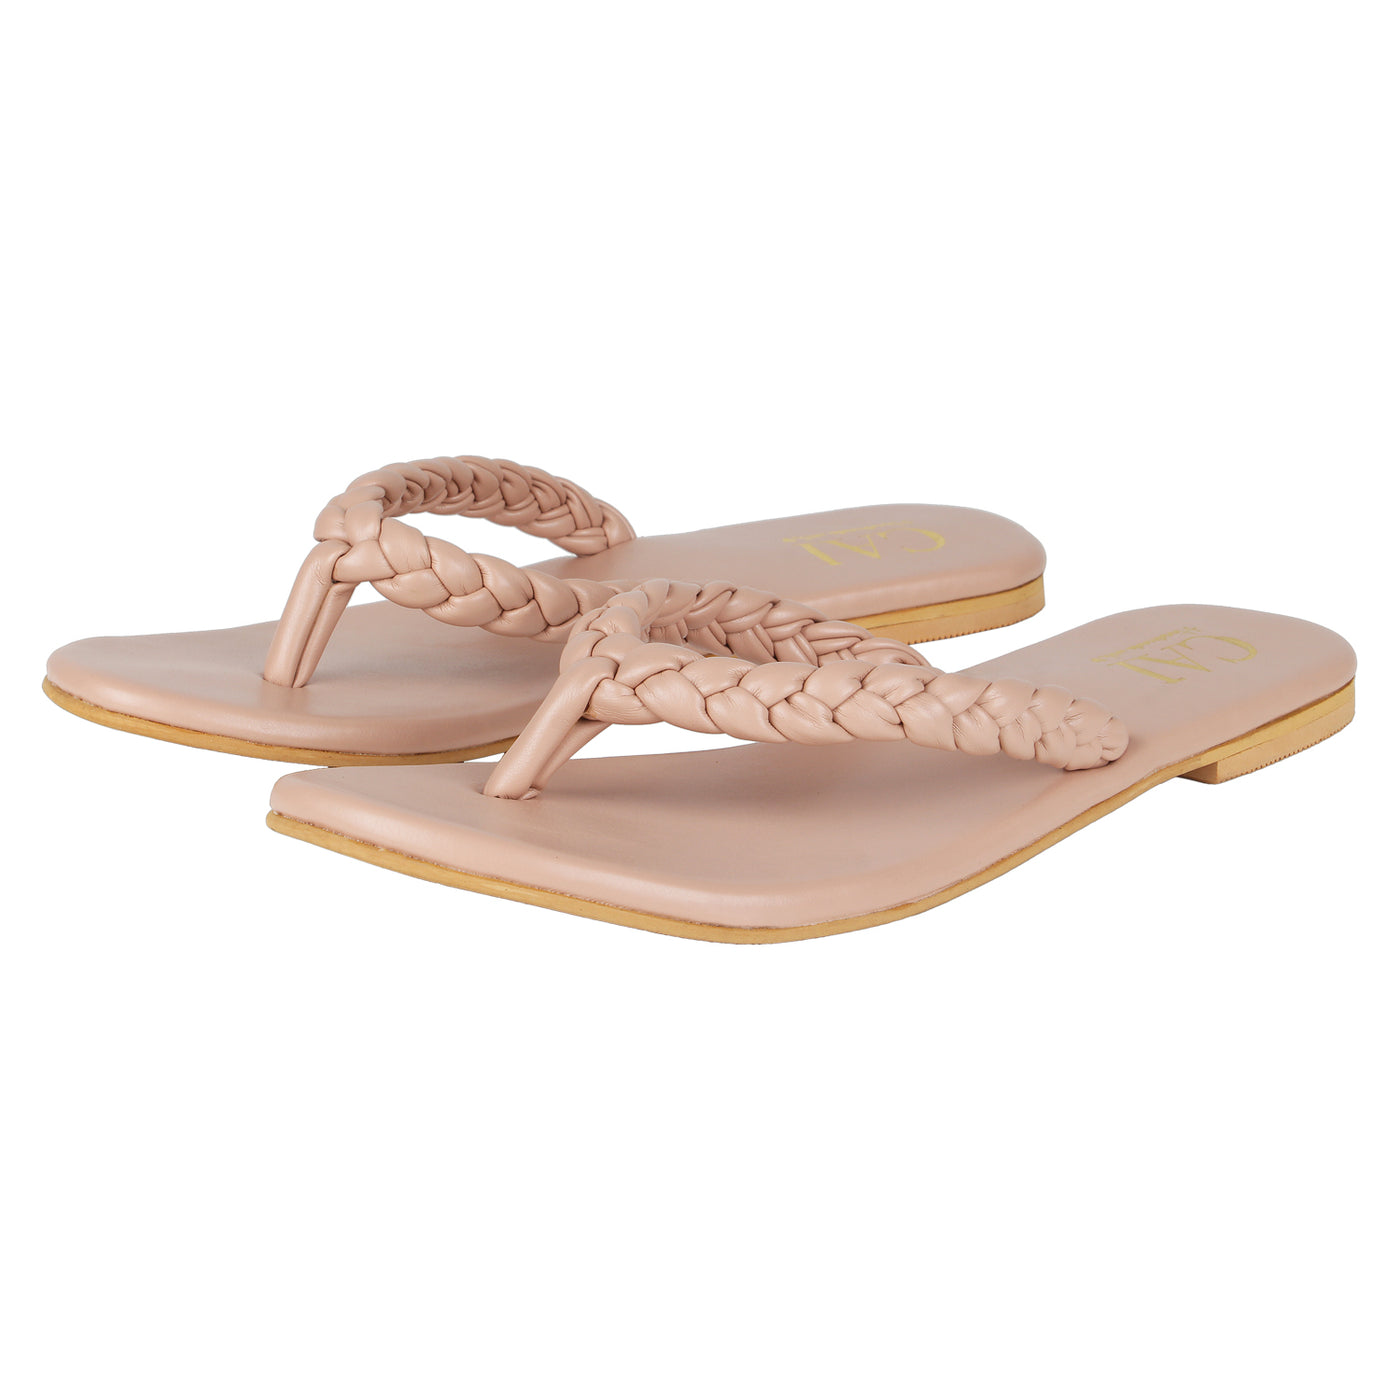 flats for women cai store